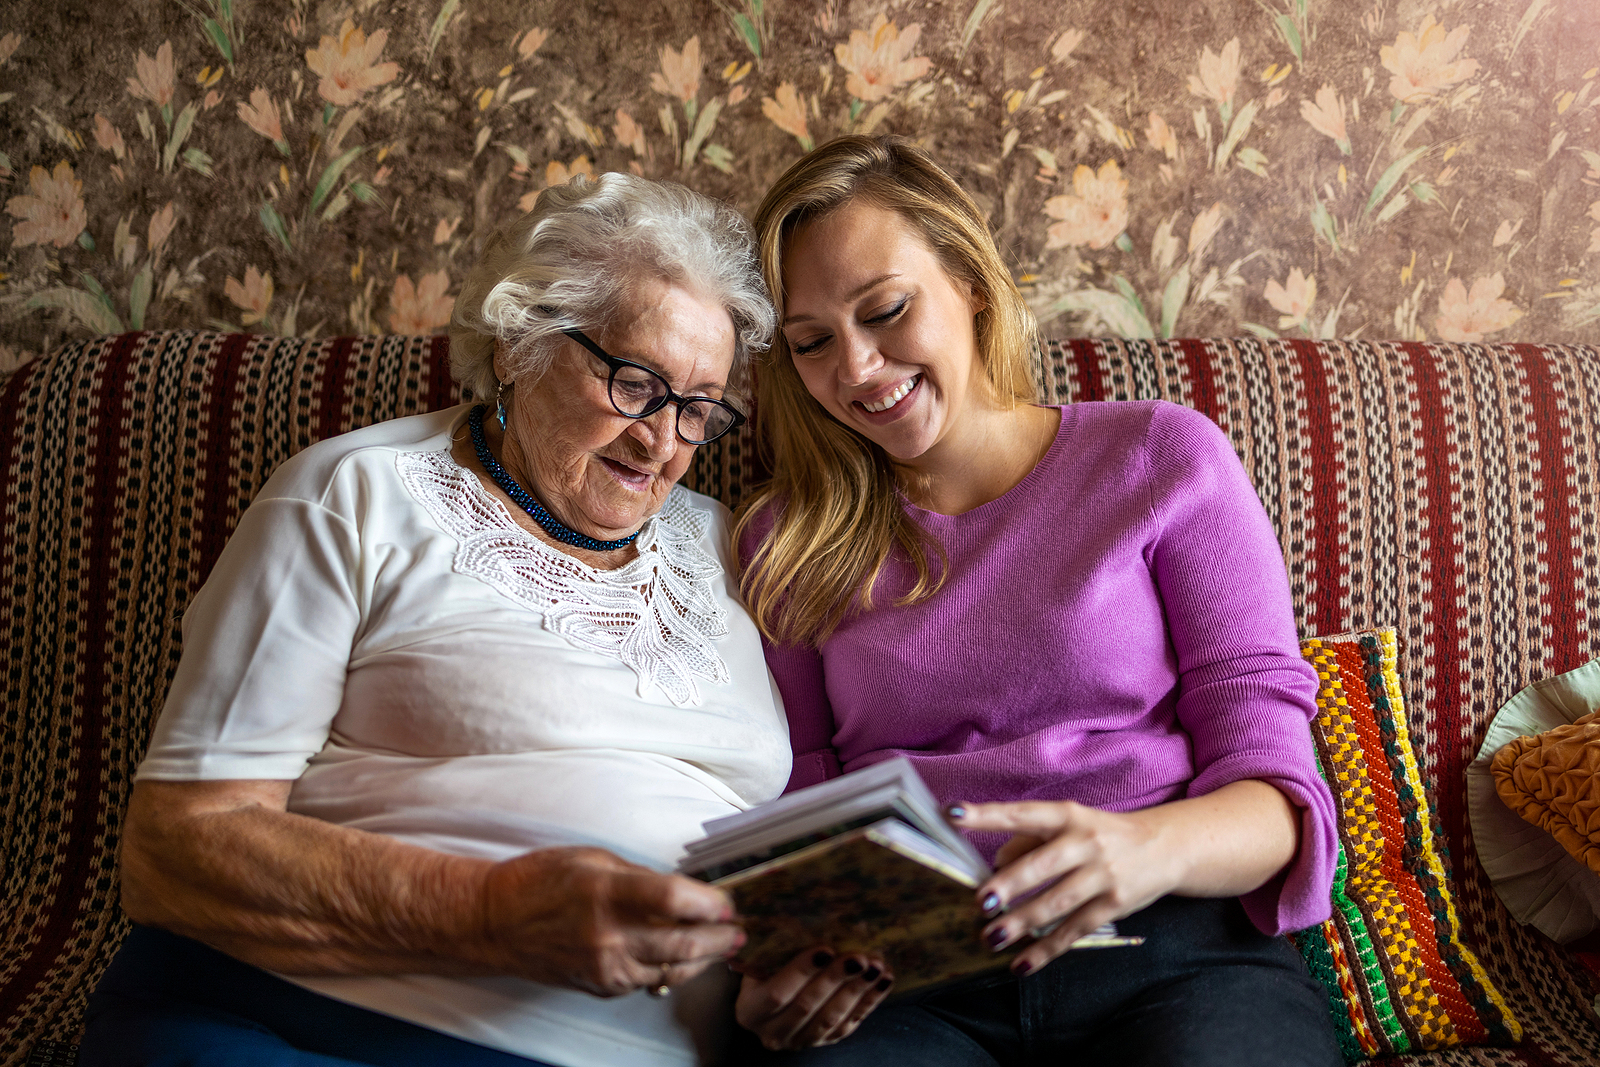 An elderly woman and her adult daughter look at a photo book together